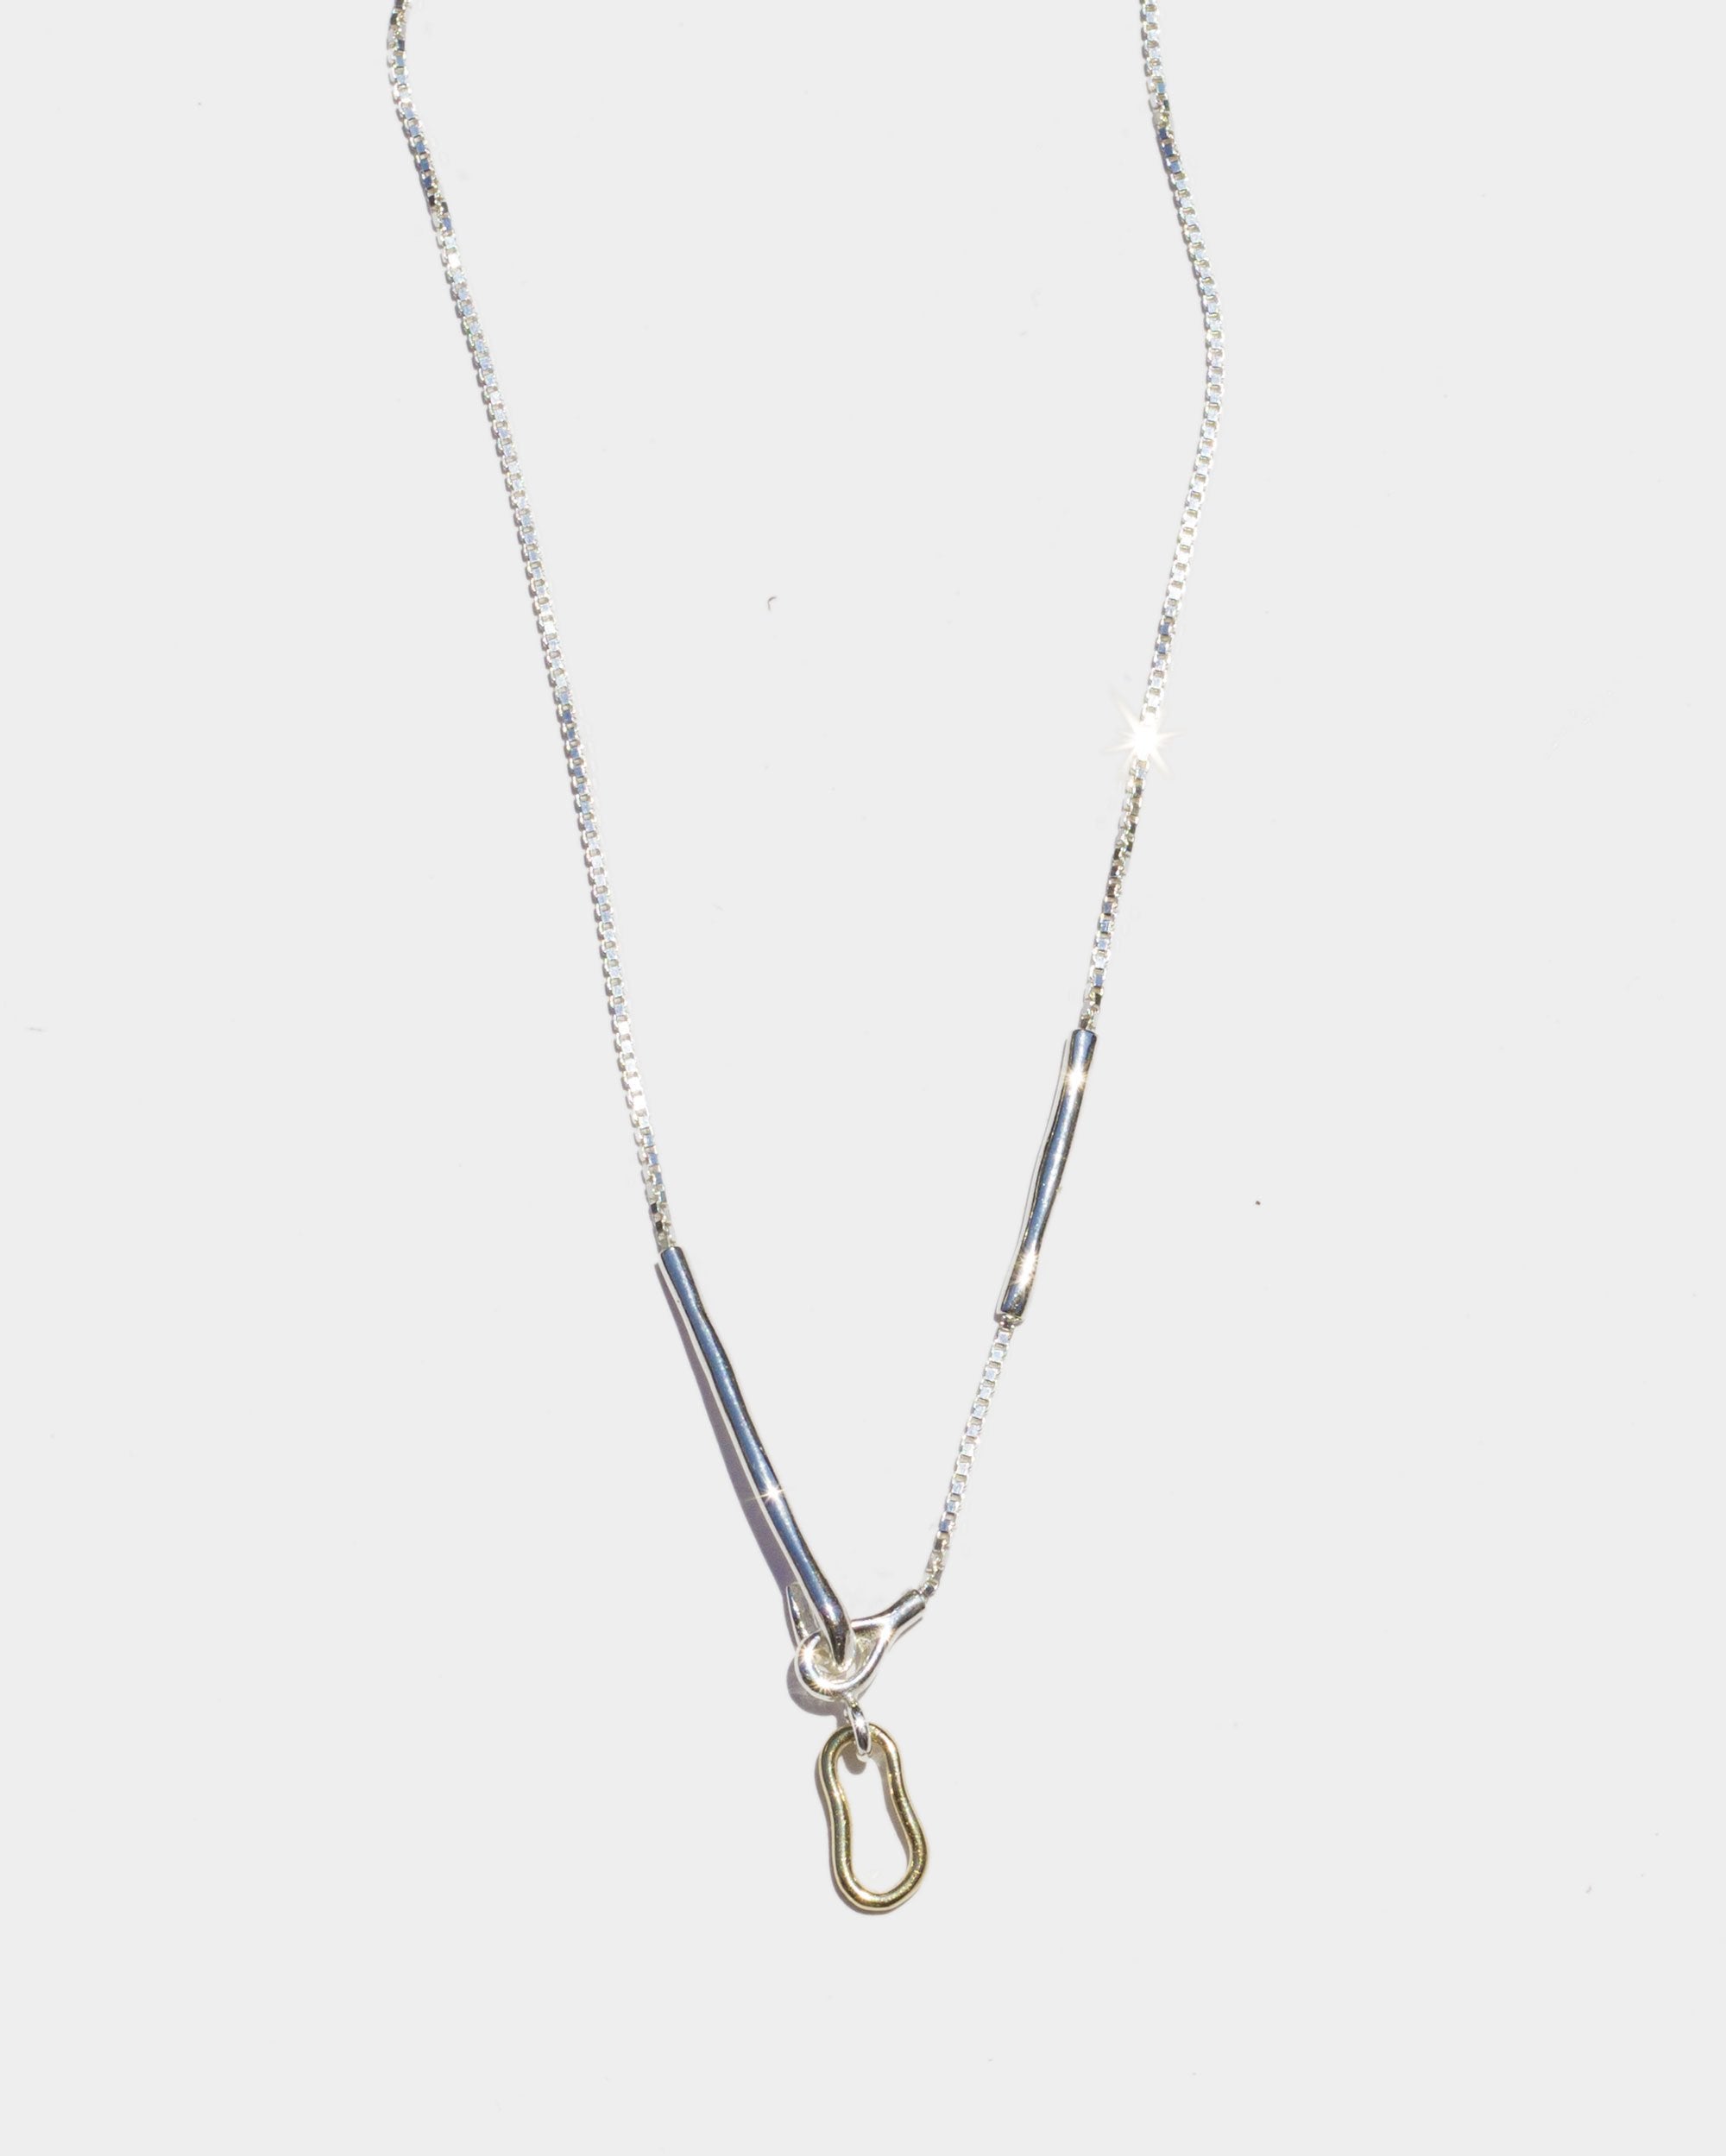 Baby Link Necklace by Knobbly Studio | Jeryco Store